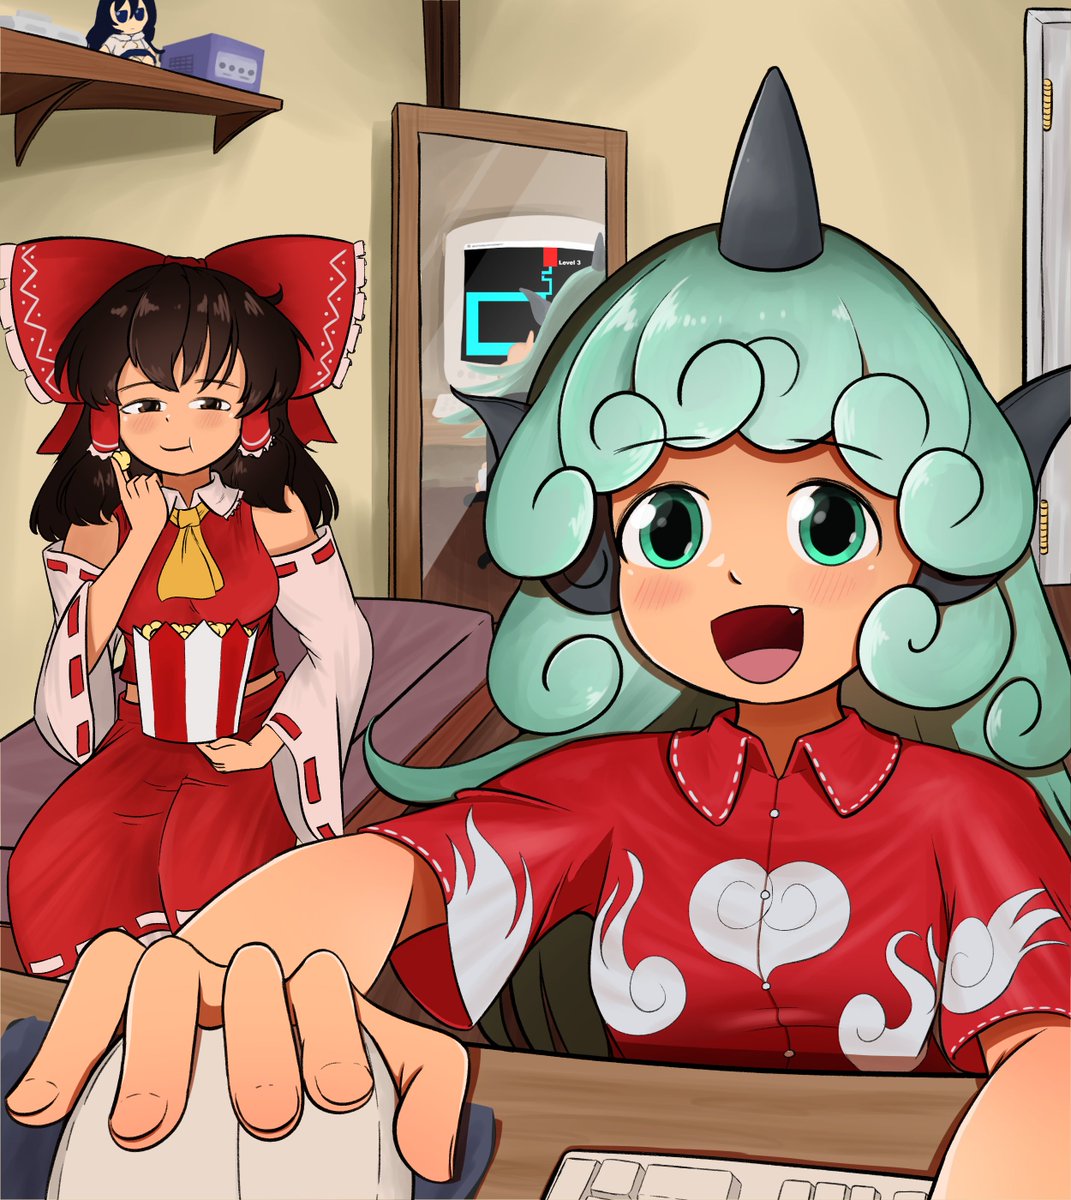 Bonding❤️ #高麗野あうん #博麗霊夢 #touhou #touhouproject #東方 #東方Project